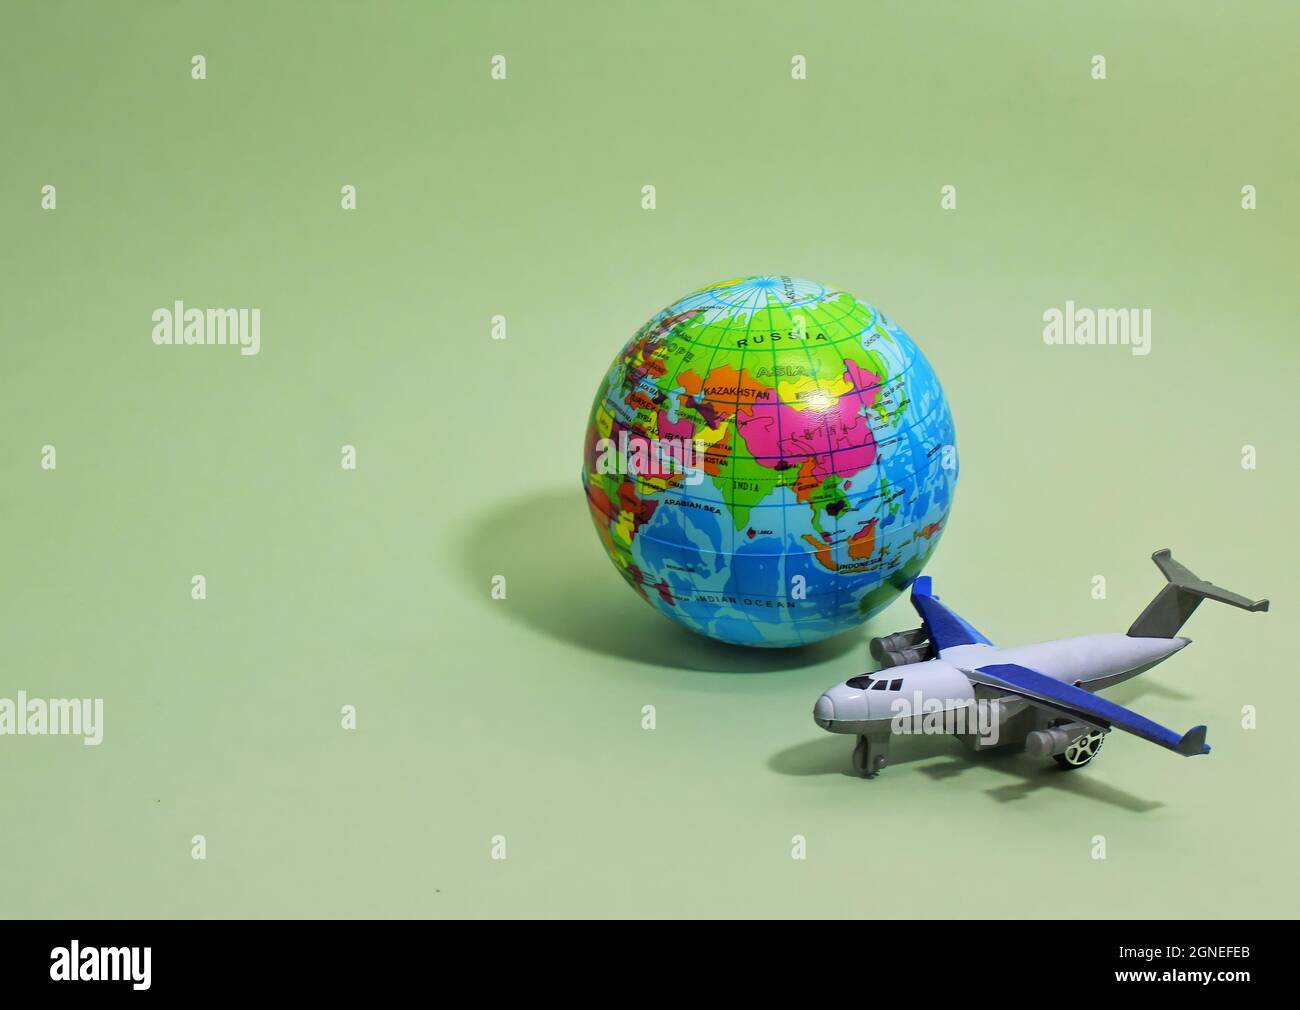 Toy plane and earth globe on green background with copy space. Selective focus. Stock Photo